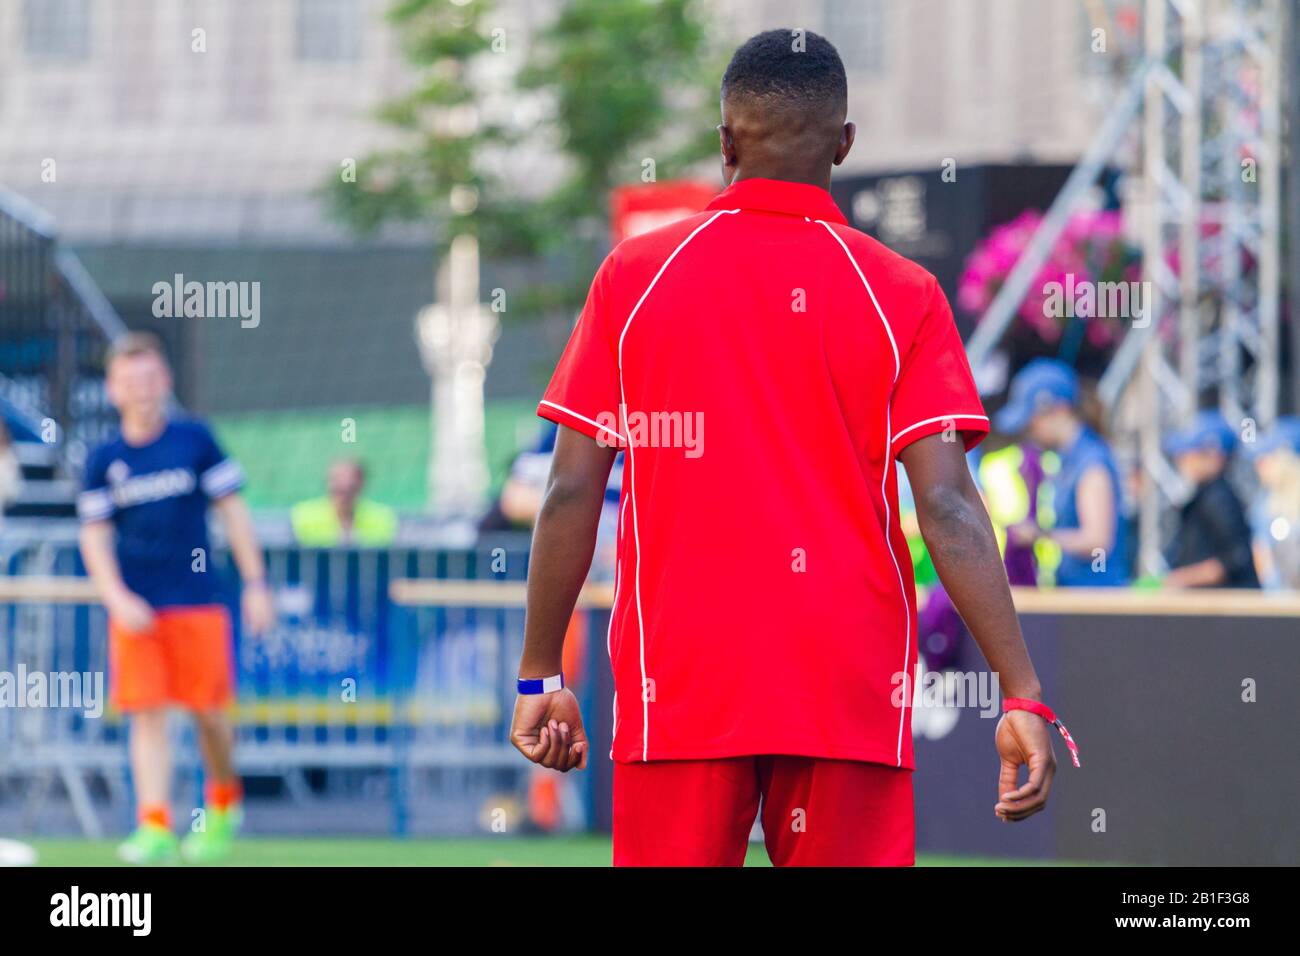 young black soccer player in red uniform Stock Photo